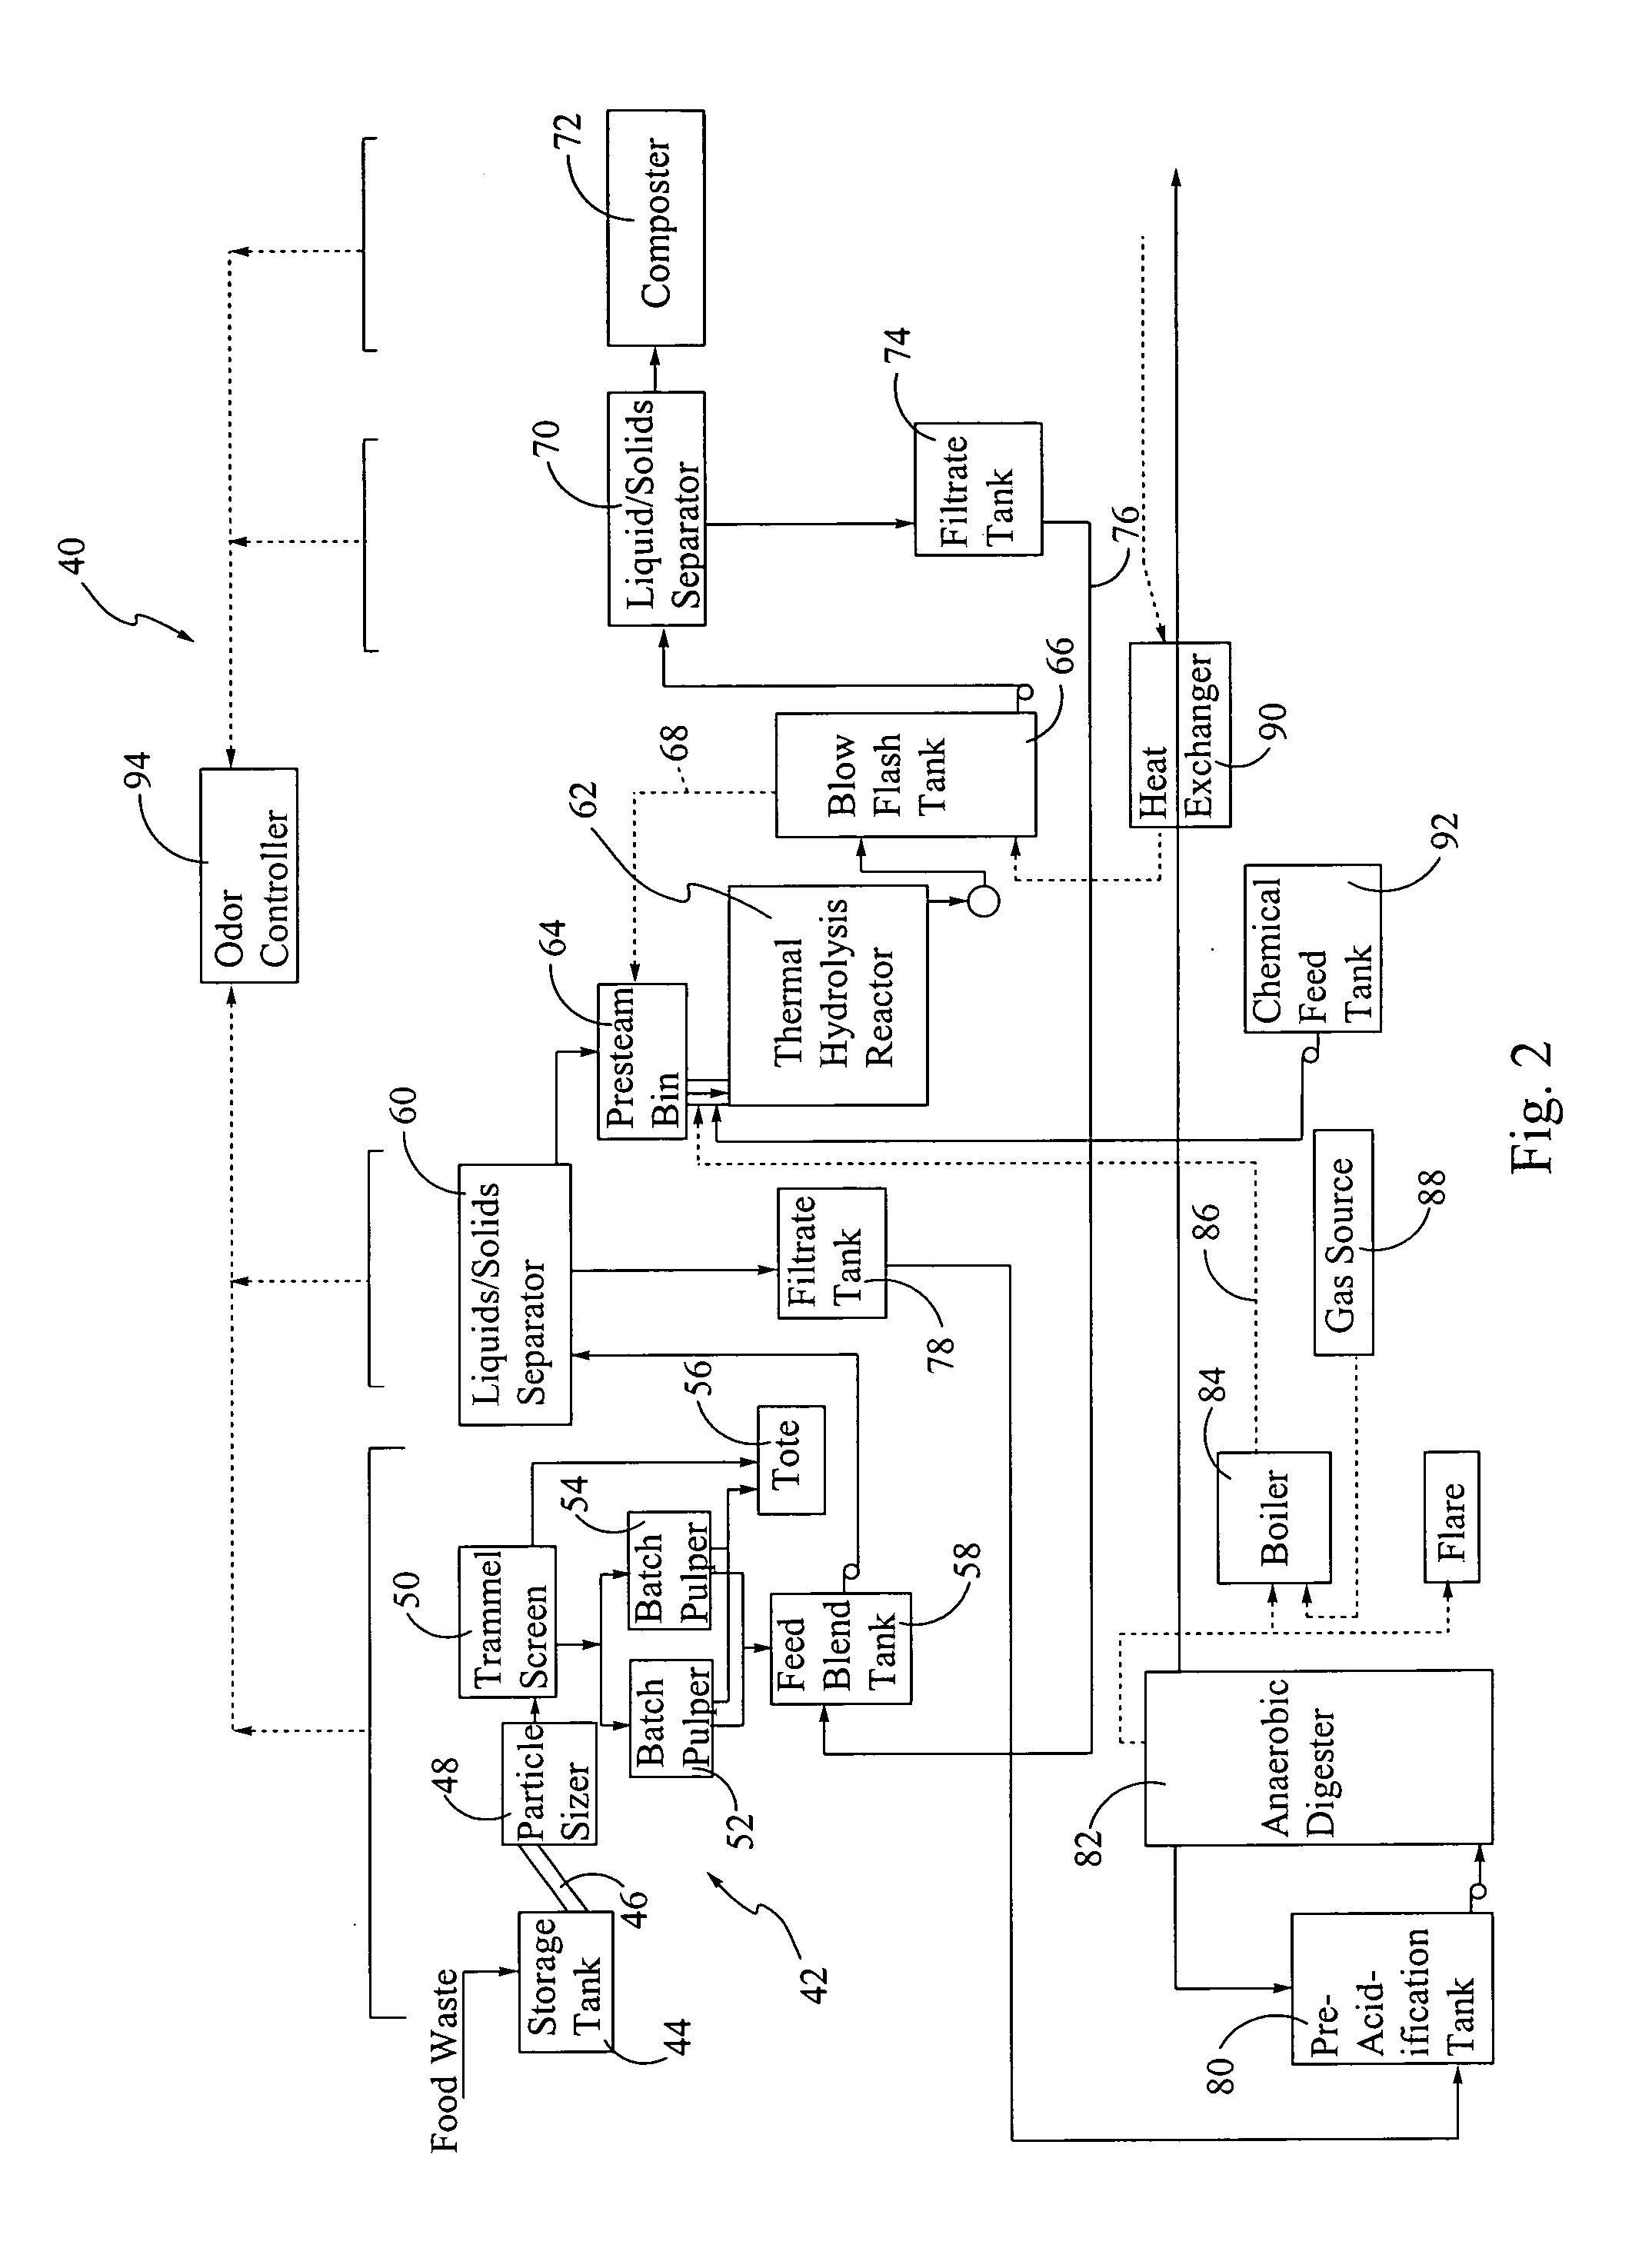 Method and apparatus for the treatment of particulate biodegradable organic waste